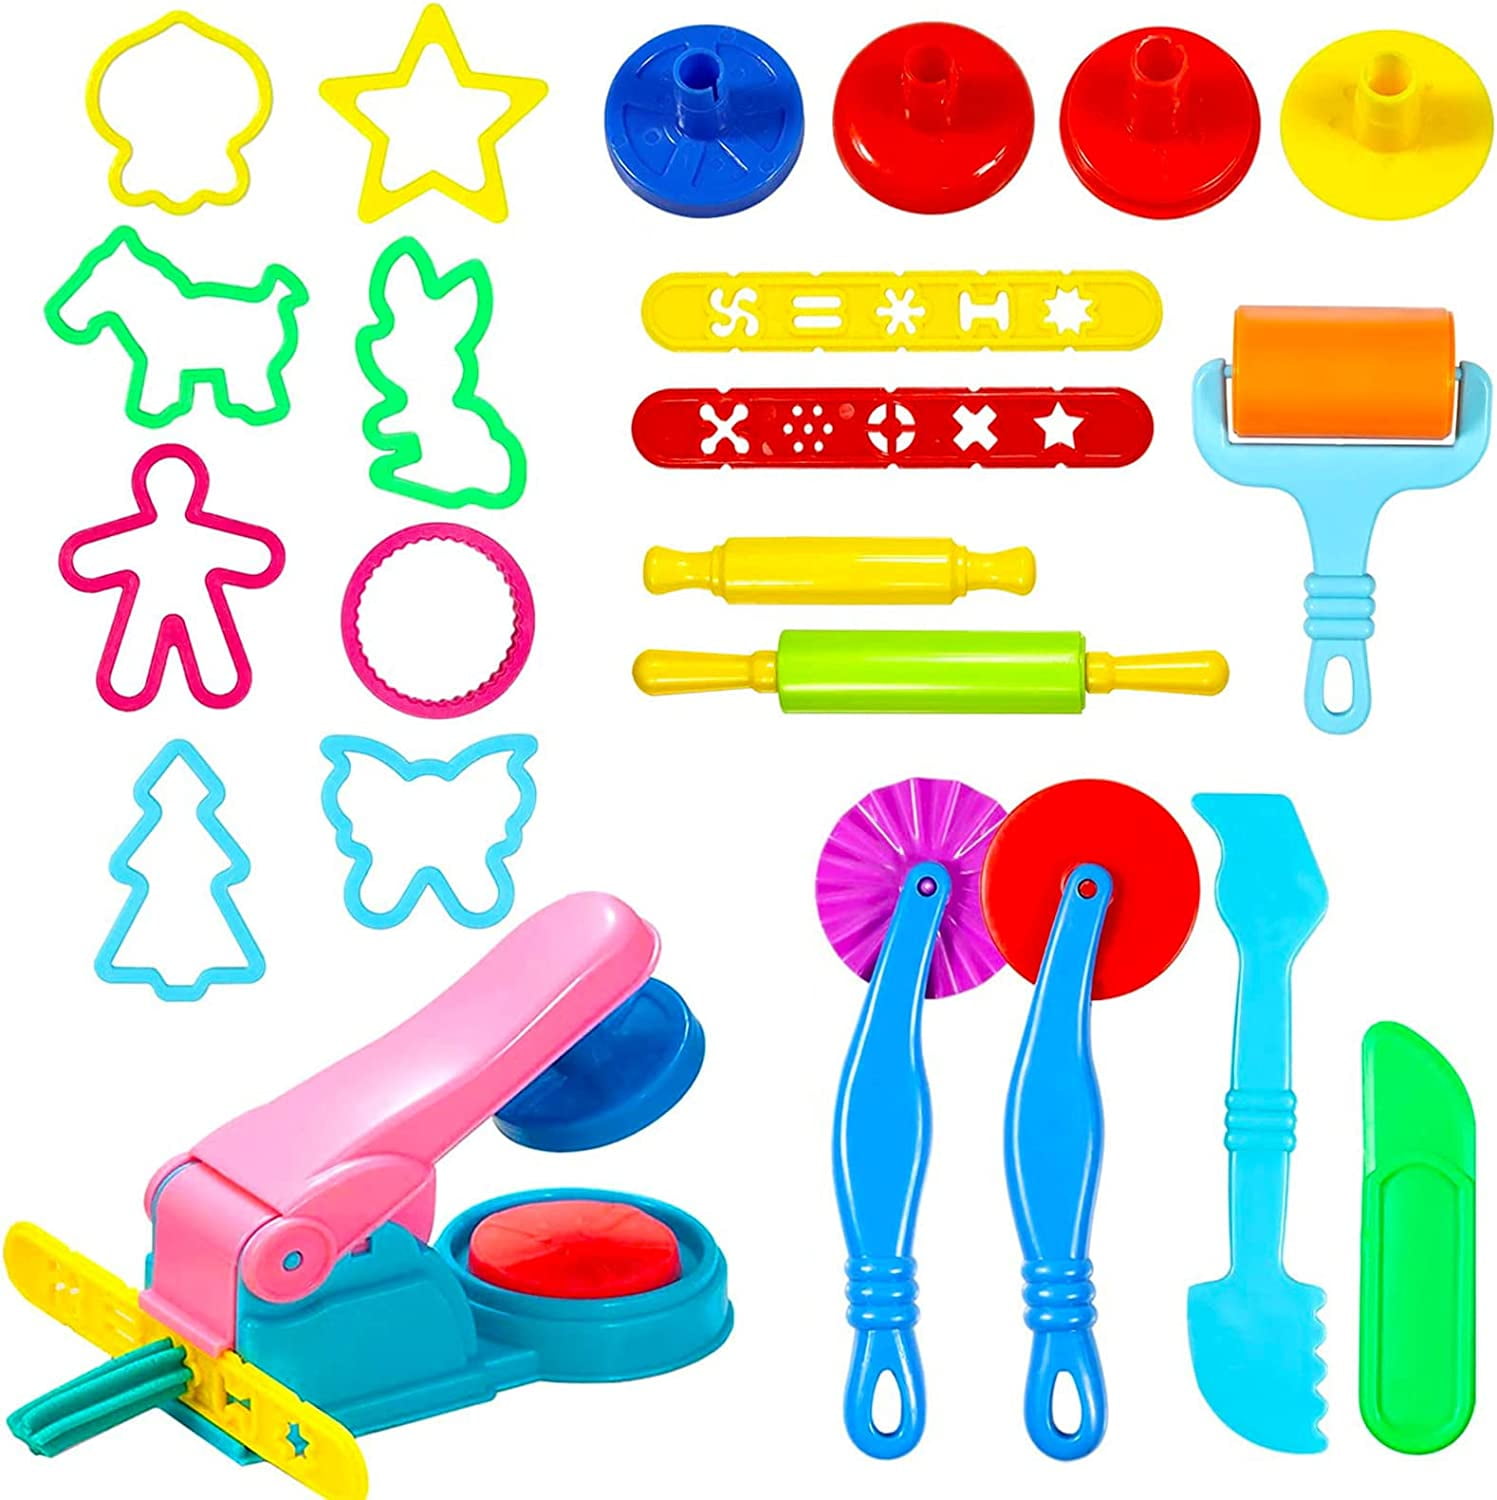 Play Dough Tools Set for Kids - Playdough Toys Accessories with Stamps  Cutter Rolling Pin and Storage Box, Party Favors Set for Age 2-8